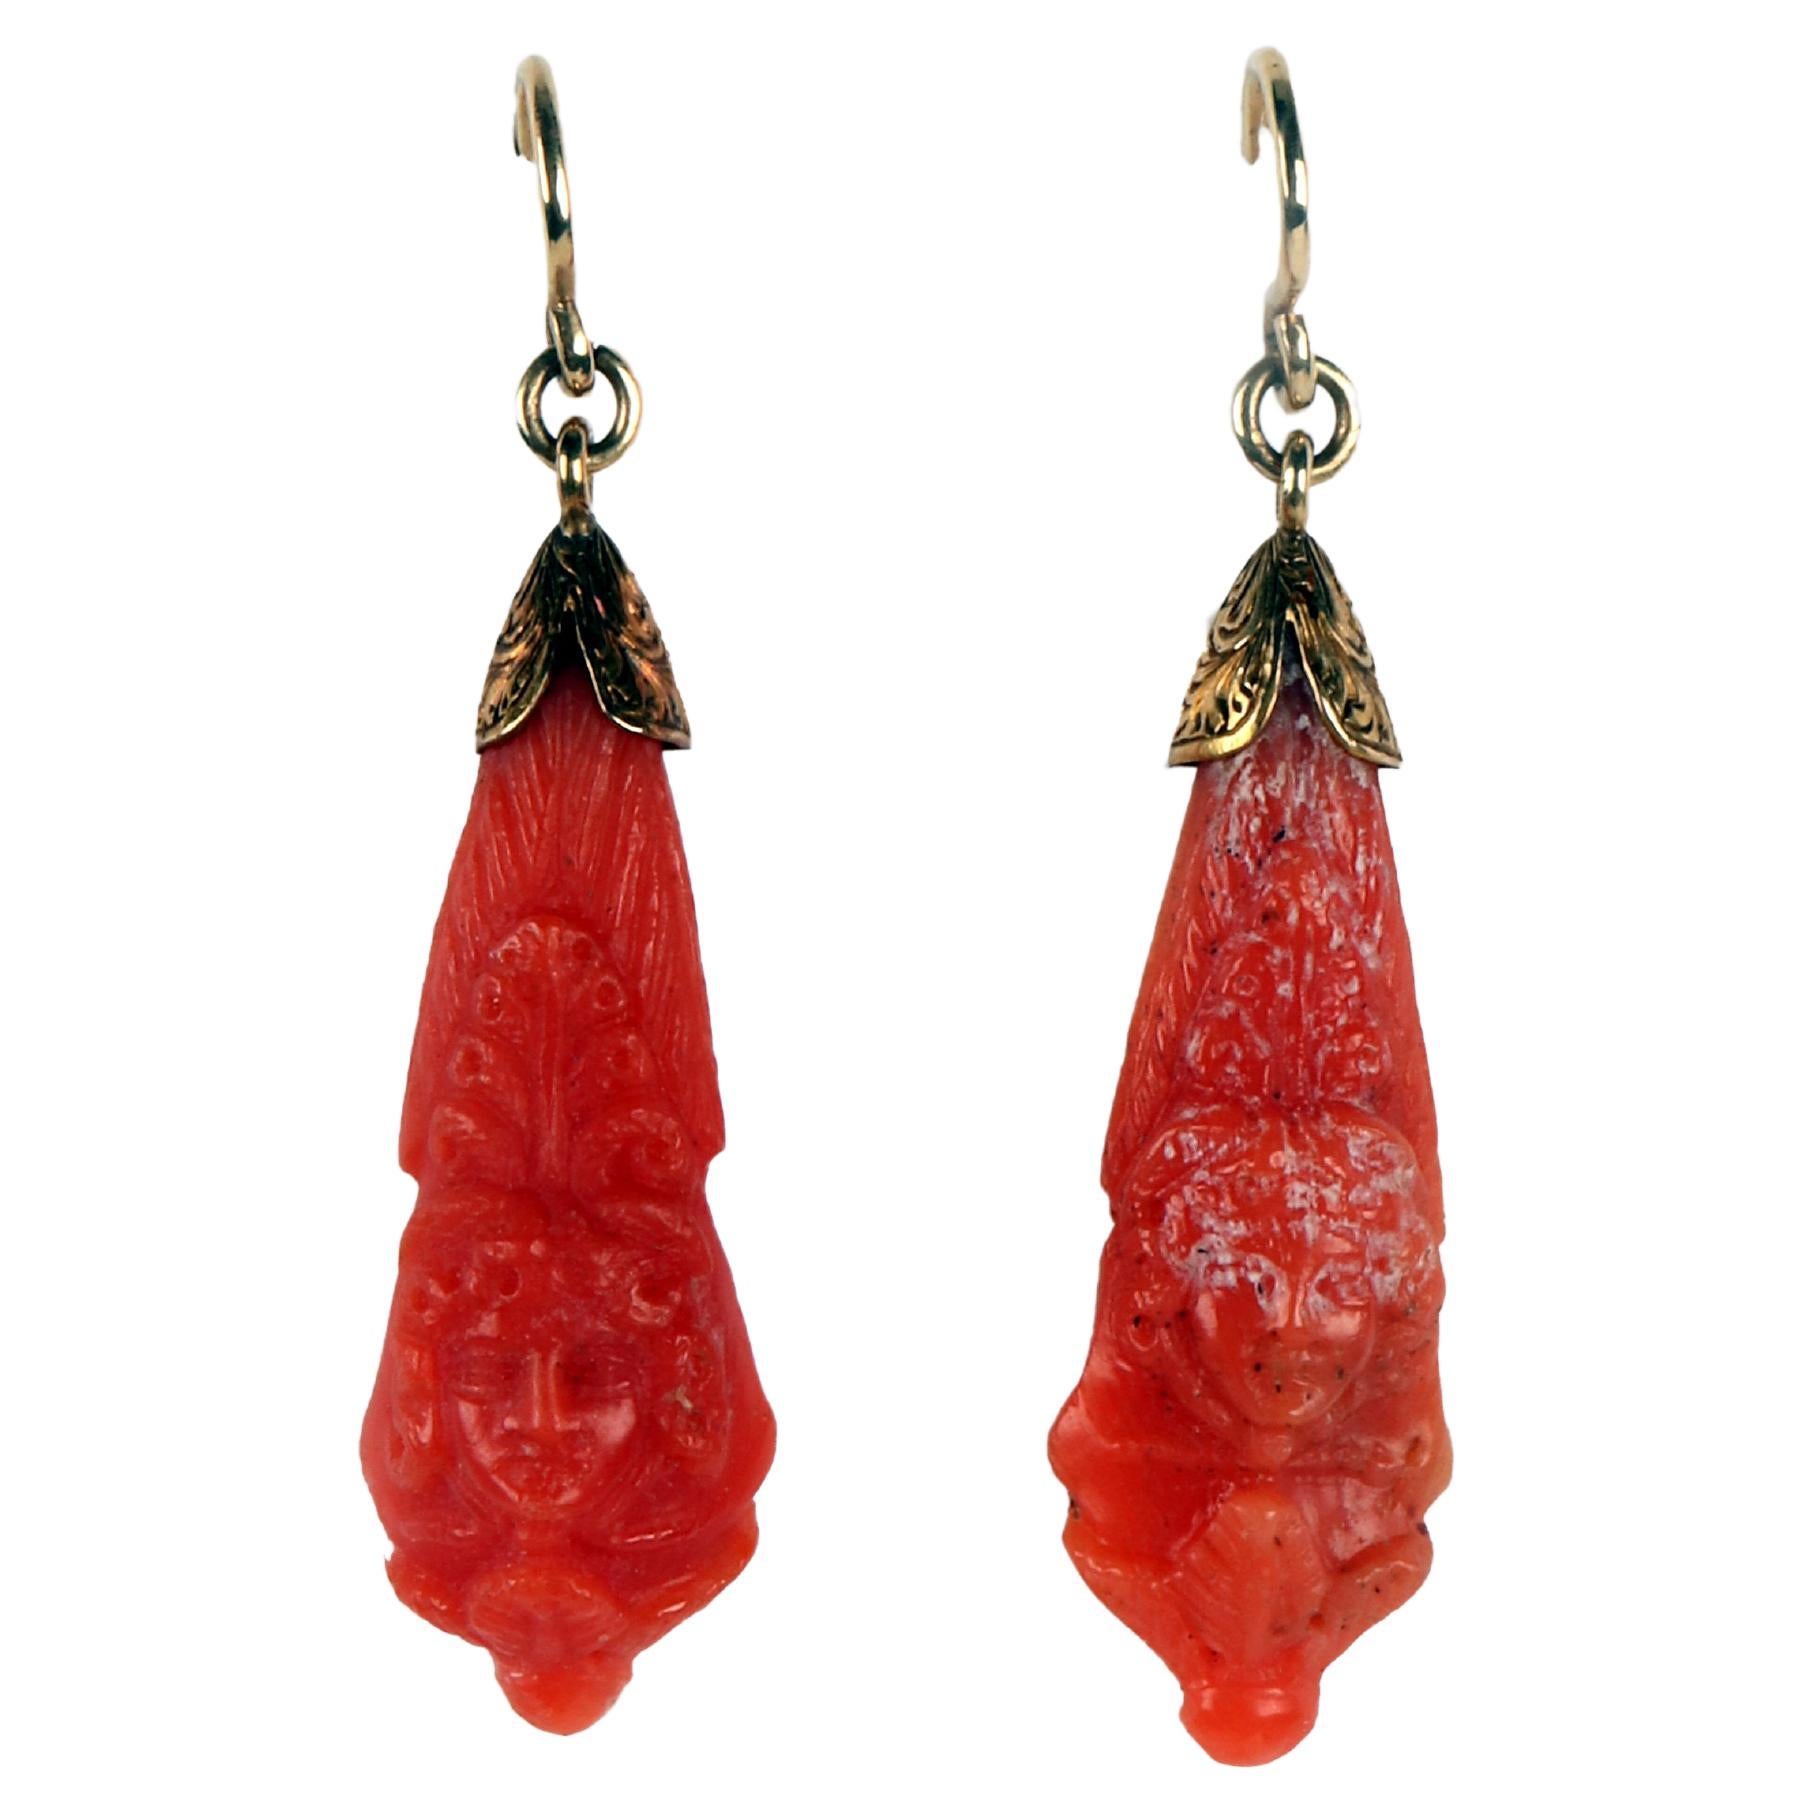 Victorian earrings in gold and Sciacca coral. England, 1880.